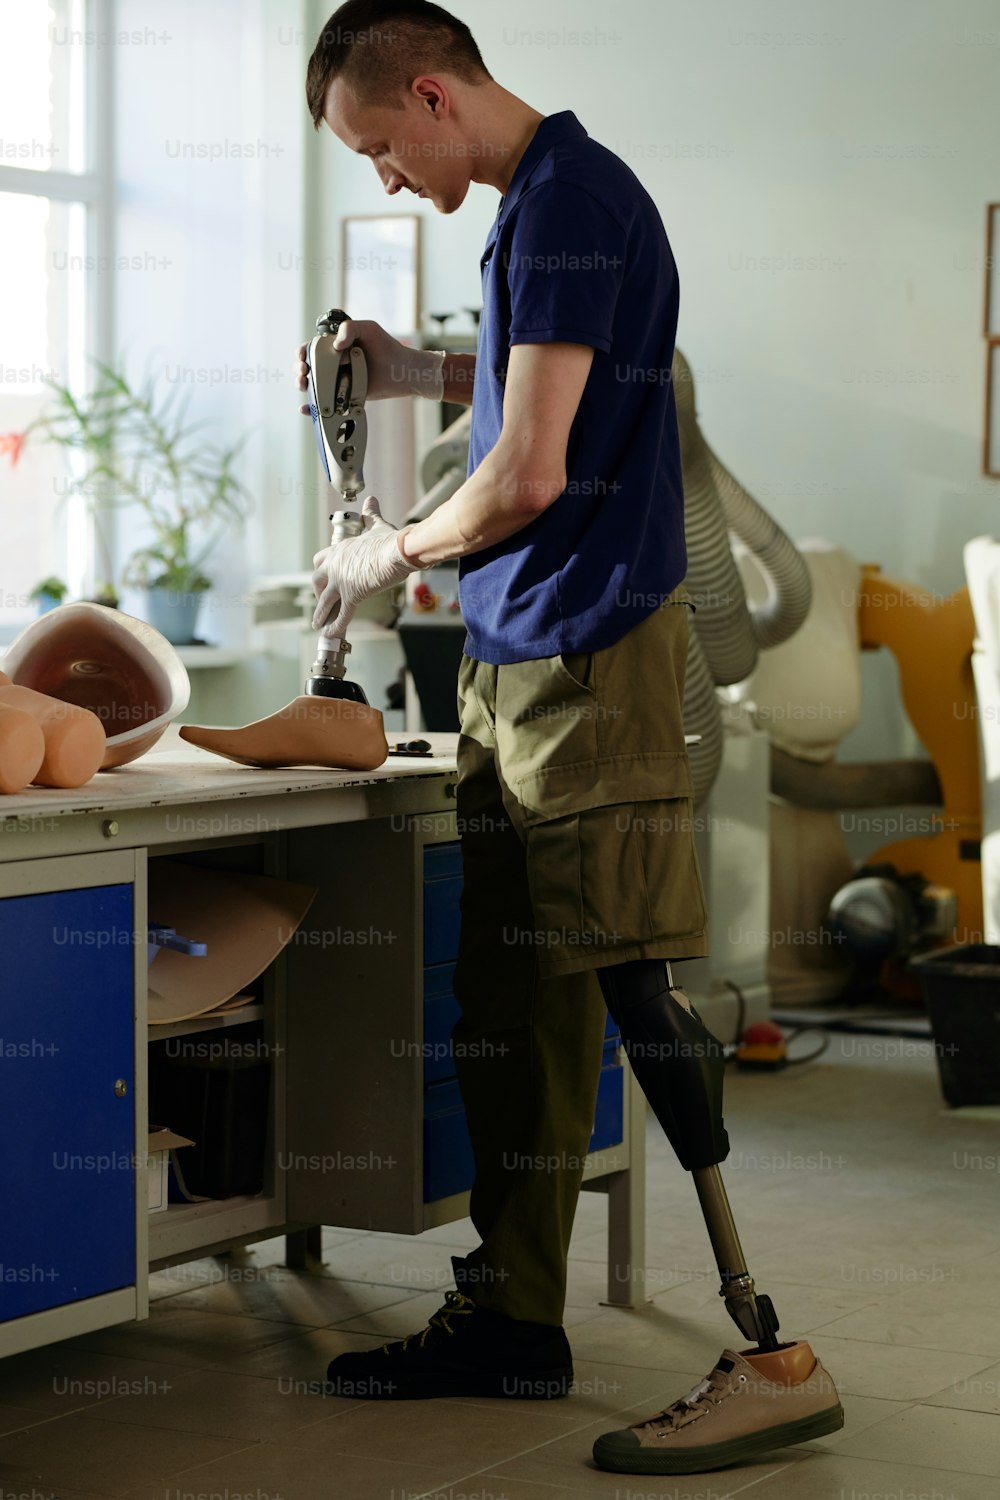 Worker of modern prosthetic production factory assembling new artificial limb while joining together two parts of lower leg section